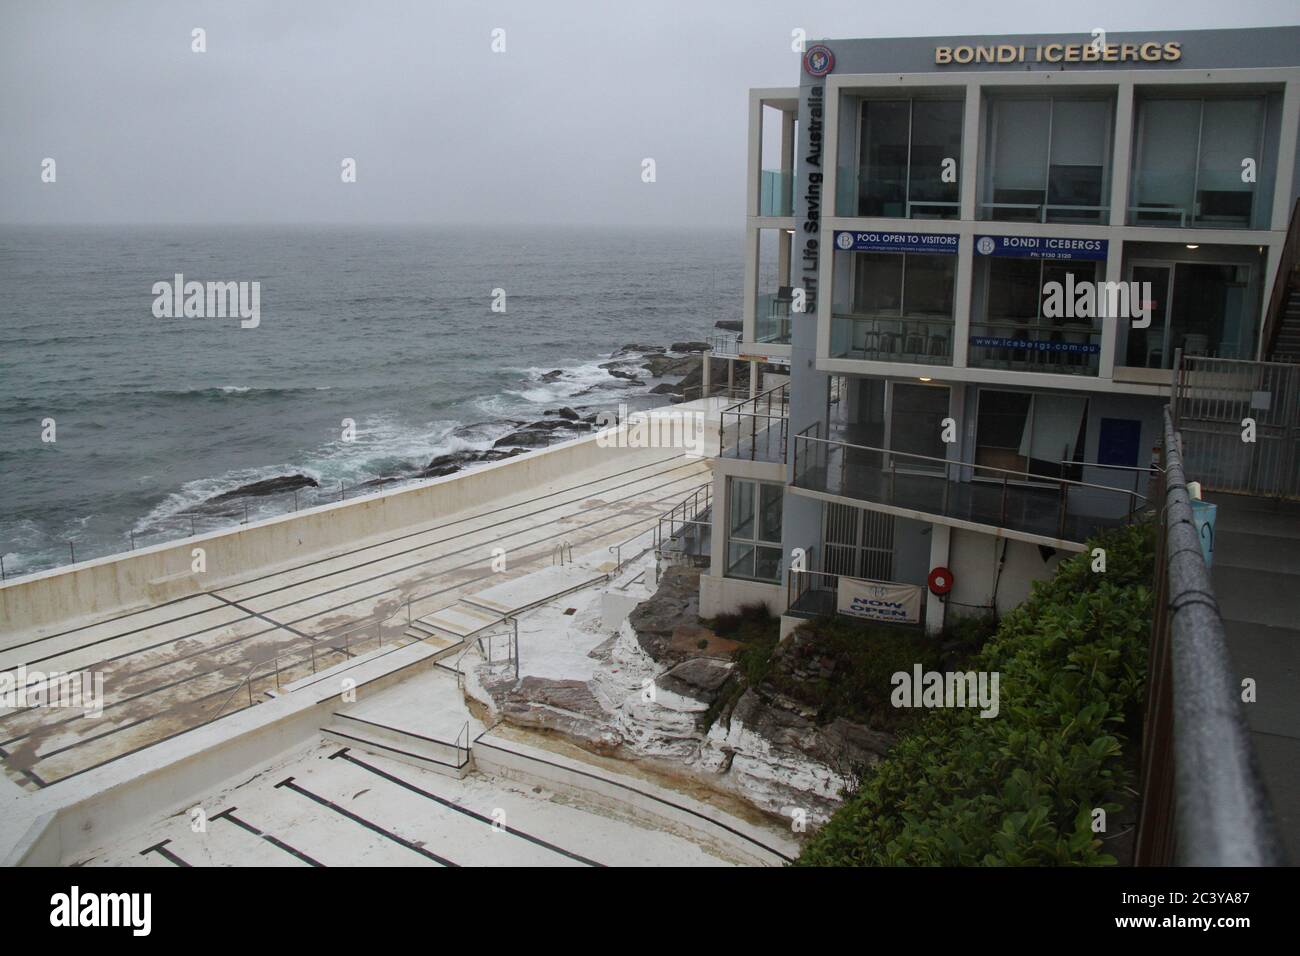 Bondi Icebergs restaurant at the southern end of Bondi Beach is popular with celebrities. It was closed on Christmas Day and the salt-water swimming p Stock Photo